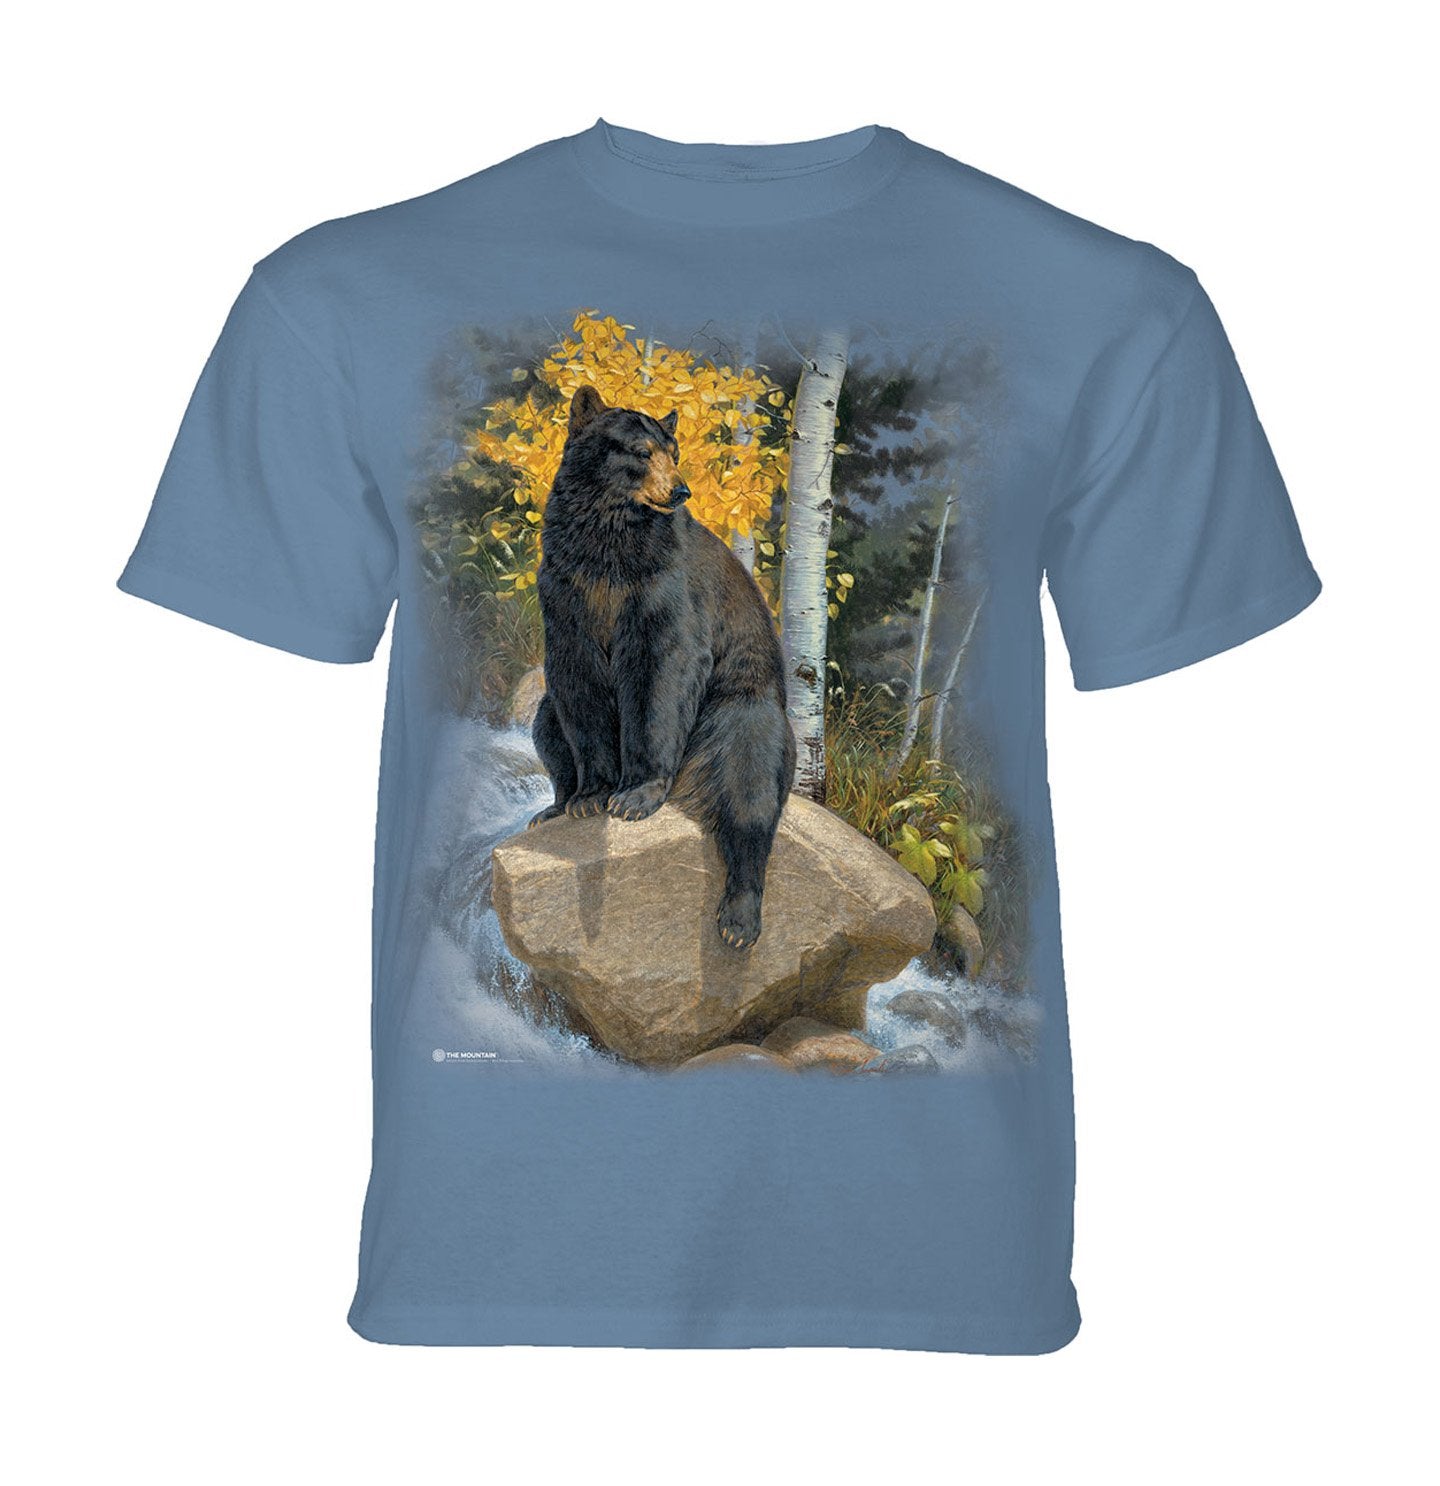 The Mountain - Paws That Refreshes - Kids' Unisex T-Shirt